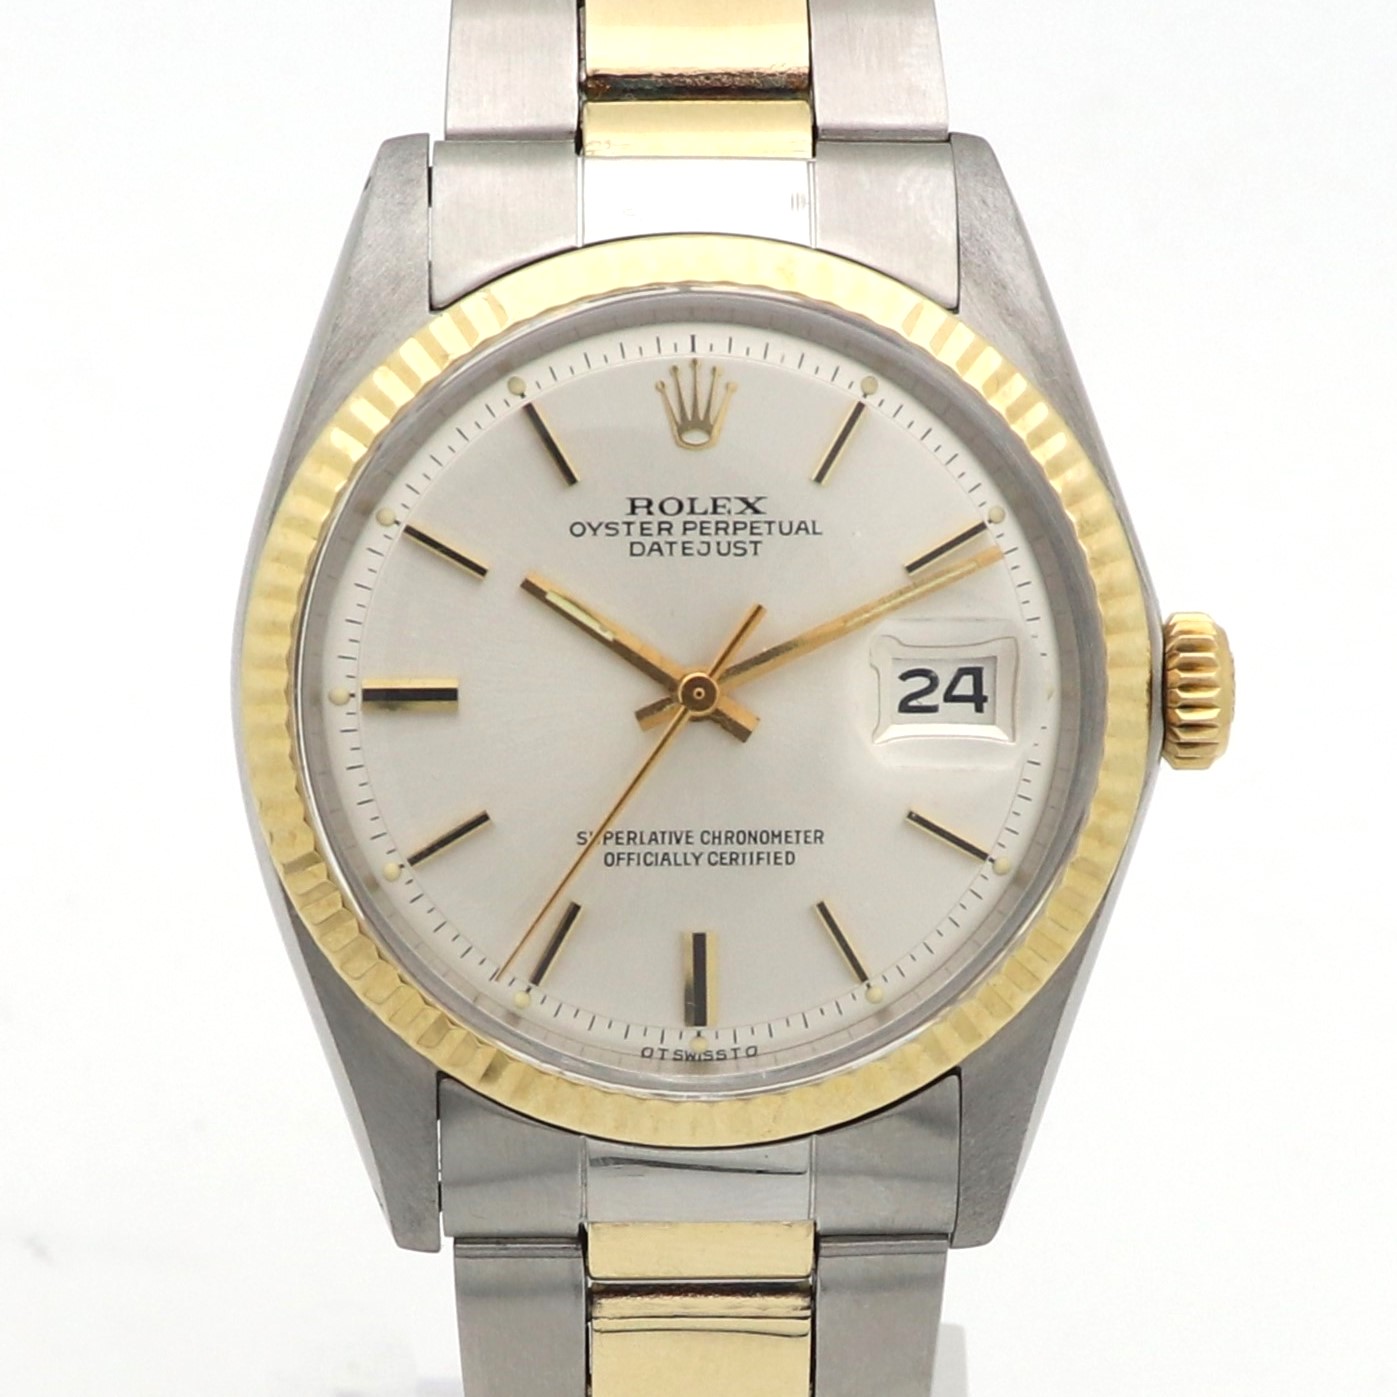 Rolex Datejust 36 Steel and Gold Ref.1601